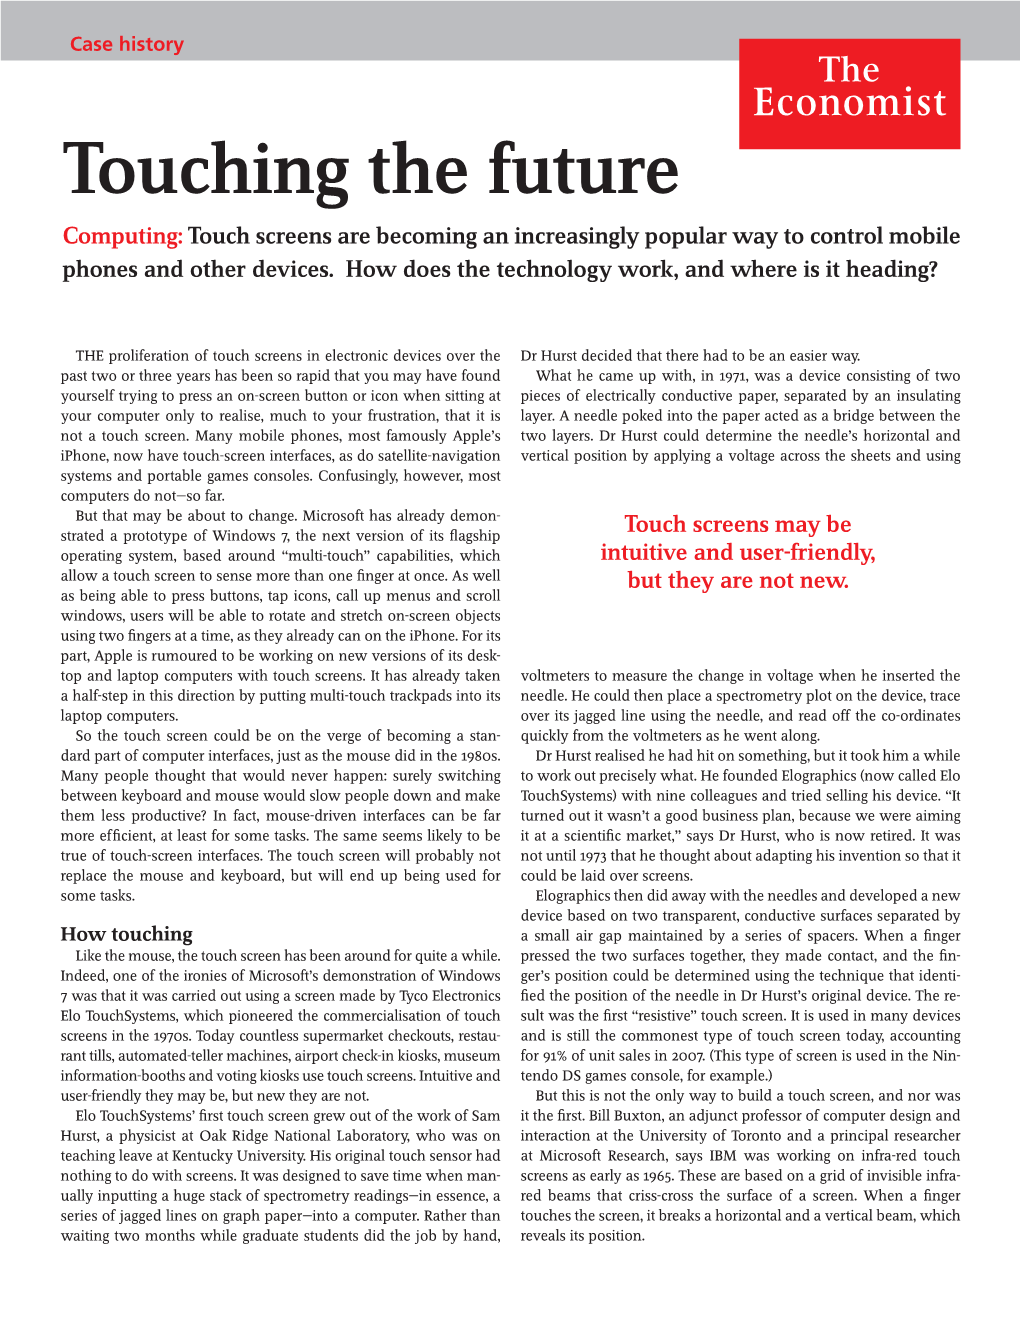 Touching the Future Computing: Touch Screens Are Becoming an Increasingly Popular Way to Control Mobile Phones and Other Devices